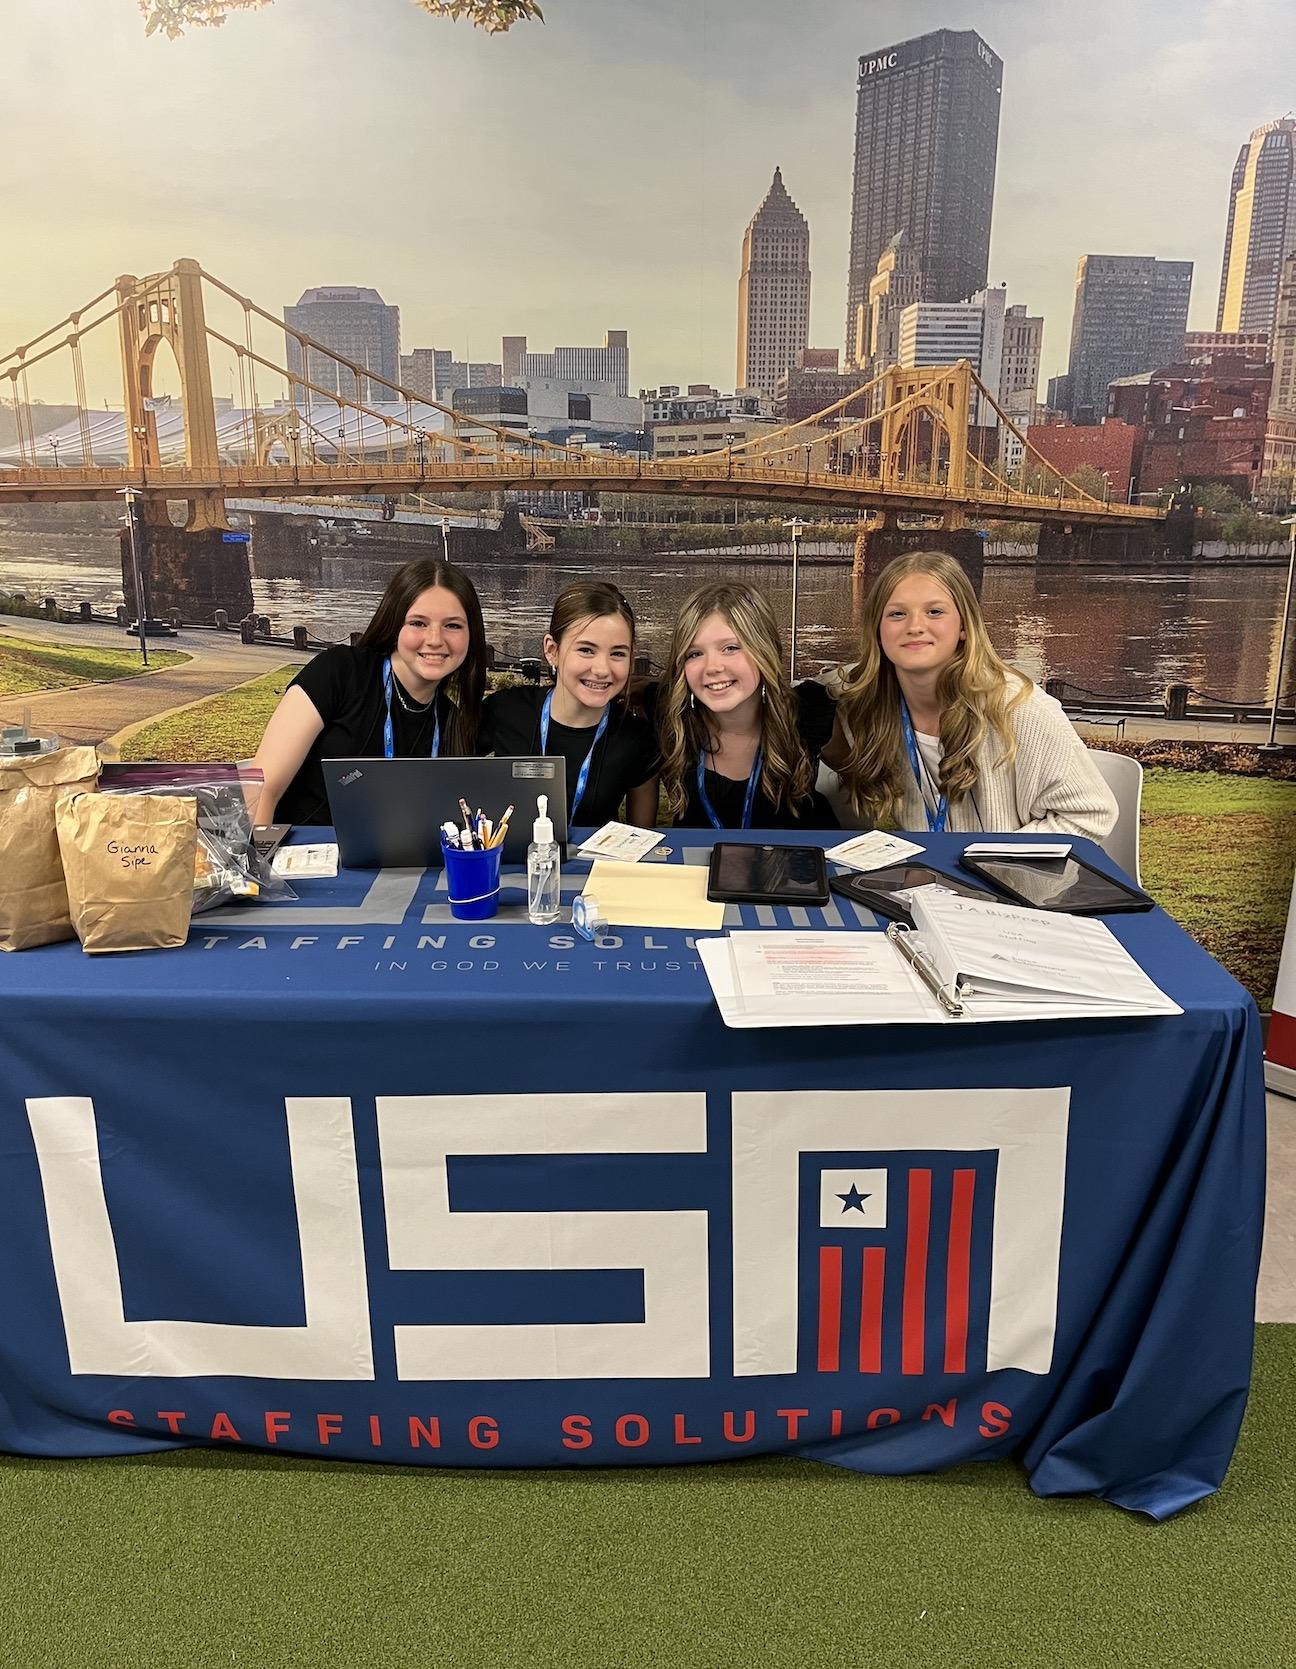 Morgan Sperduto,Gianna Sipe, Brynne Lawson, and Peyton Mihalko represented USA Staffing Solutions